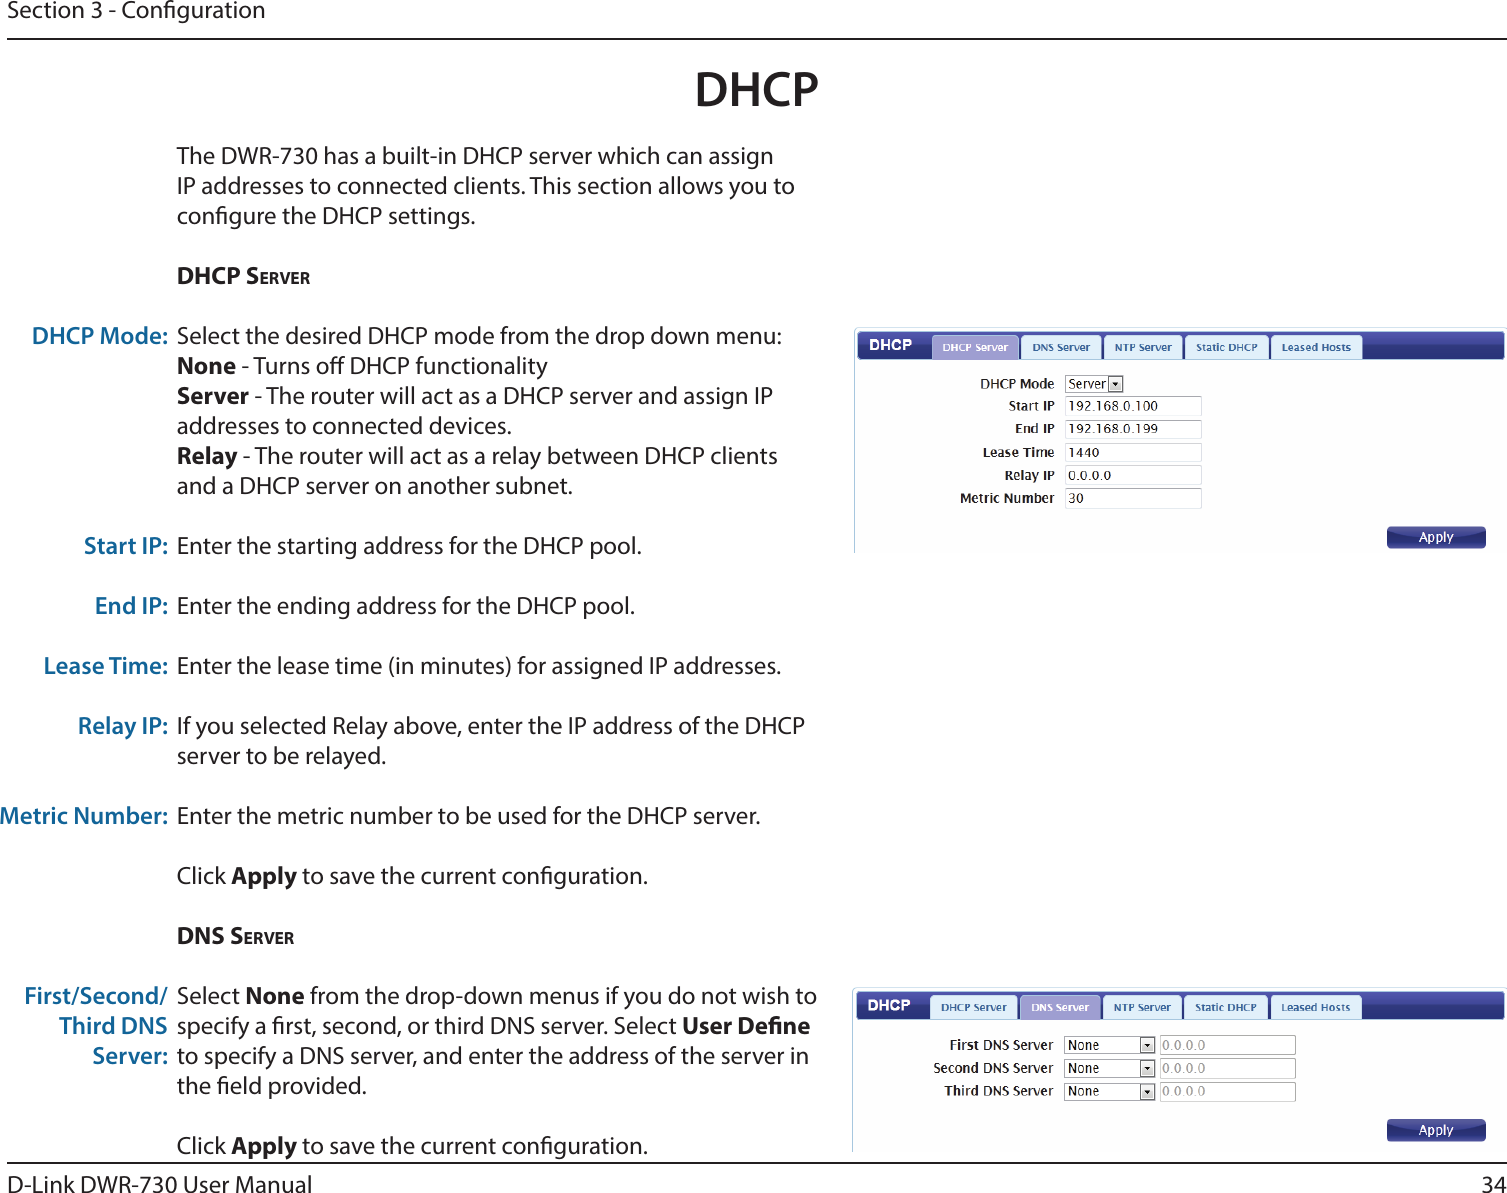 34D-Link DWR-730 User ManualSection 3 - CongurationDHCPThe DWR-730 has a built-in DHCP server which can assign IP addresses to connected clients. This section allows you to congure the DHCP settings. DHCp serverSelect the desired DHCP mode from the drop down menu:None - Turns o DHCP functionalityServer - The router will act as a DHCP server and assign IP addresses to connected devices.Relay - The router will act as a relay between DHCP clients and a DHCP server on another subnet. Enter the starting address for the DHCP pool.Enter the ending address for the DHCP pool.Enter the lease time (in minutes) for assigned IP addresses. If you selected Relay above, enter the IP address of the DHCP server to be relayed.Enter the metric number to be used for the DHCP server.Click Apply to save the current conguration. DNs serverSelect None from the drop-down menus if you do not wish to specify a rst, second, or third DNS server. Select User Dene to specify a DNS server, and enter the address of the server in the eld provided. Click Apply to save the current conguration. DHCP Mode:Start IP:End IP:Lease Time:Relay IP:Metric Number:First/Second/Third DNS Server: